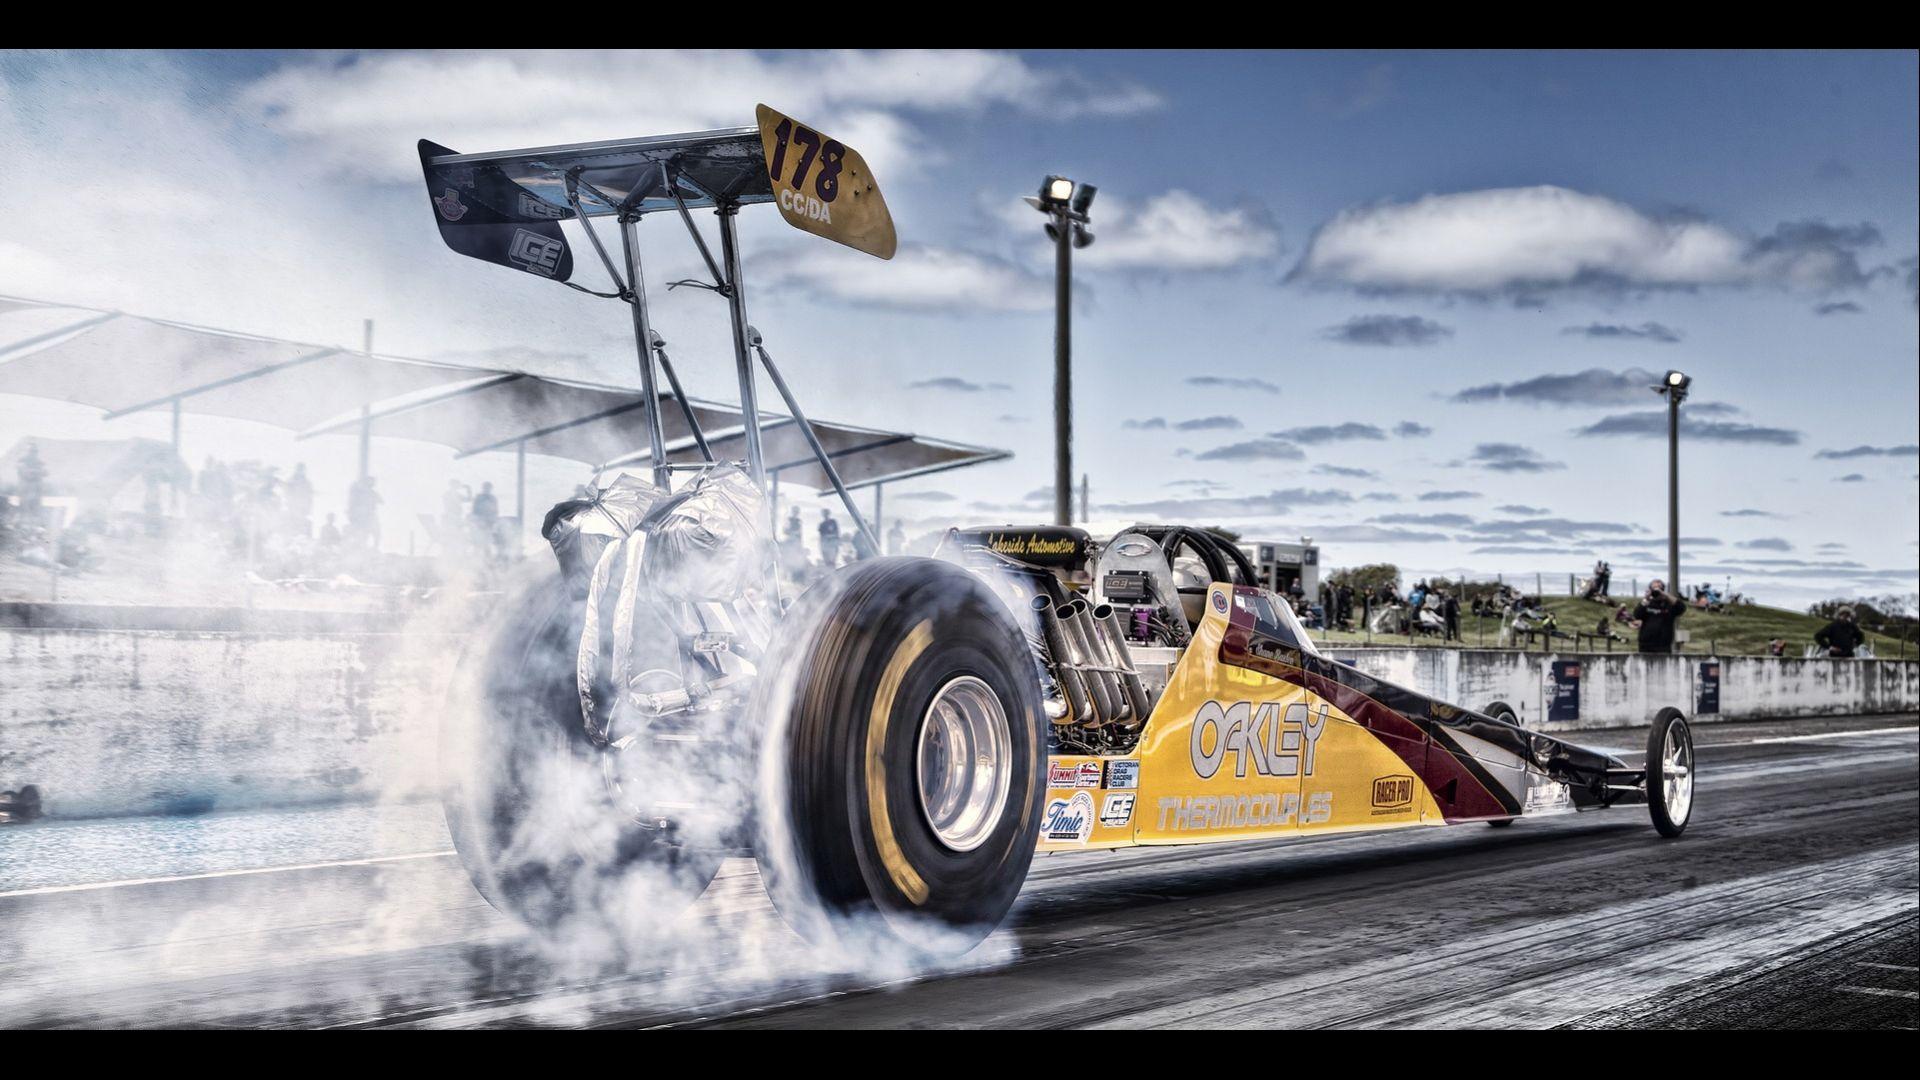 Dragster Wallpapers